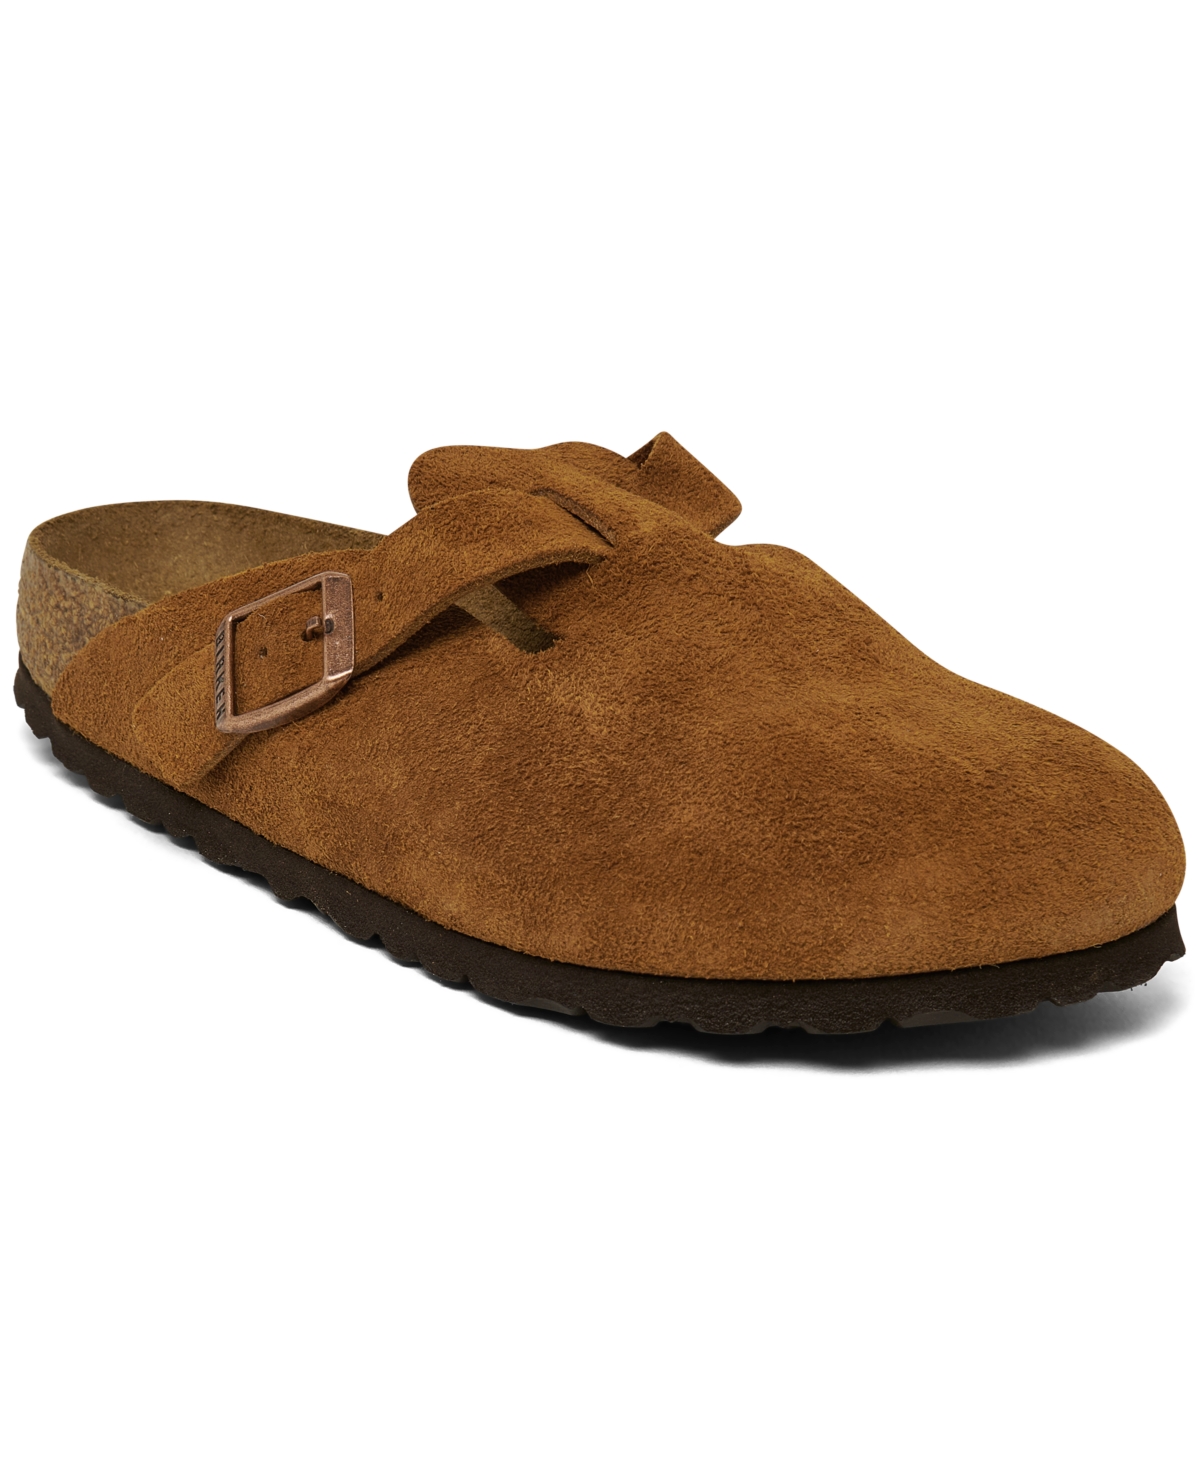 Women's Boston Soft Footbed Suede Leather Clogs from Finish Line - Cork Brown